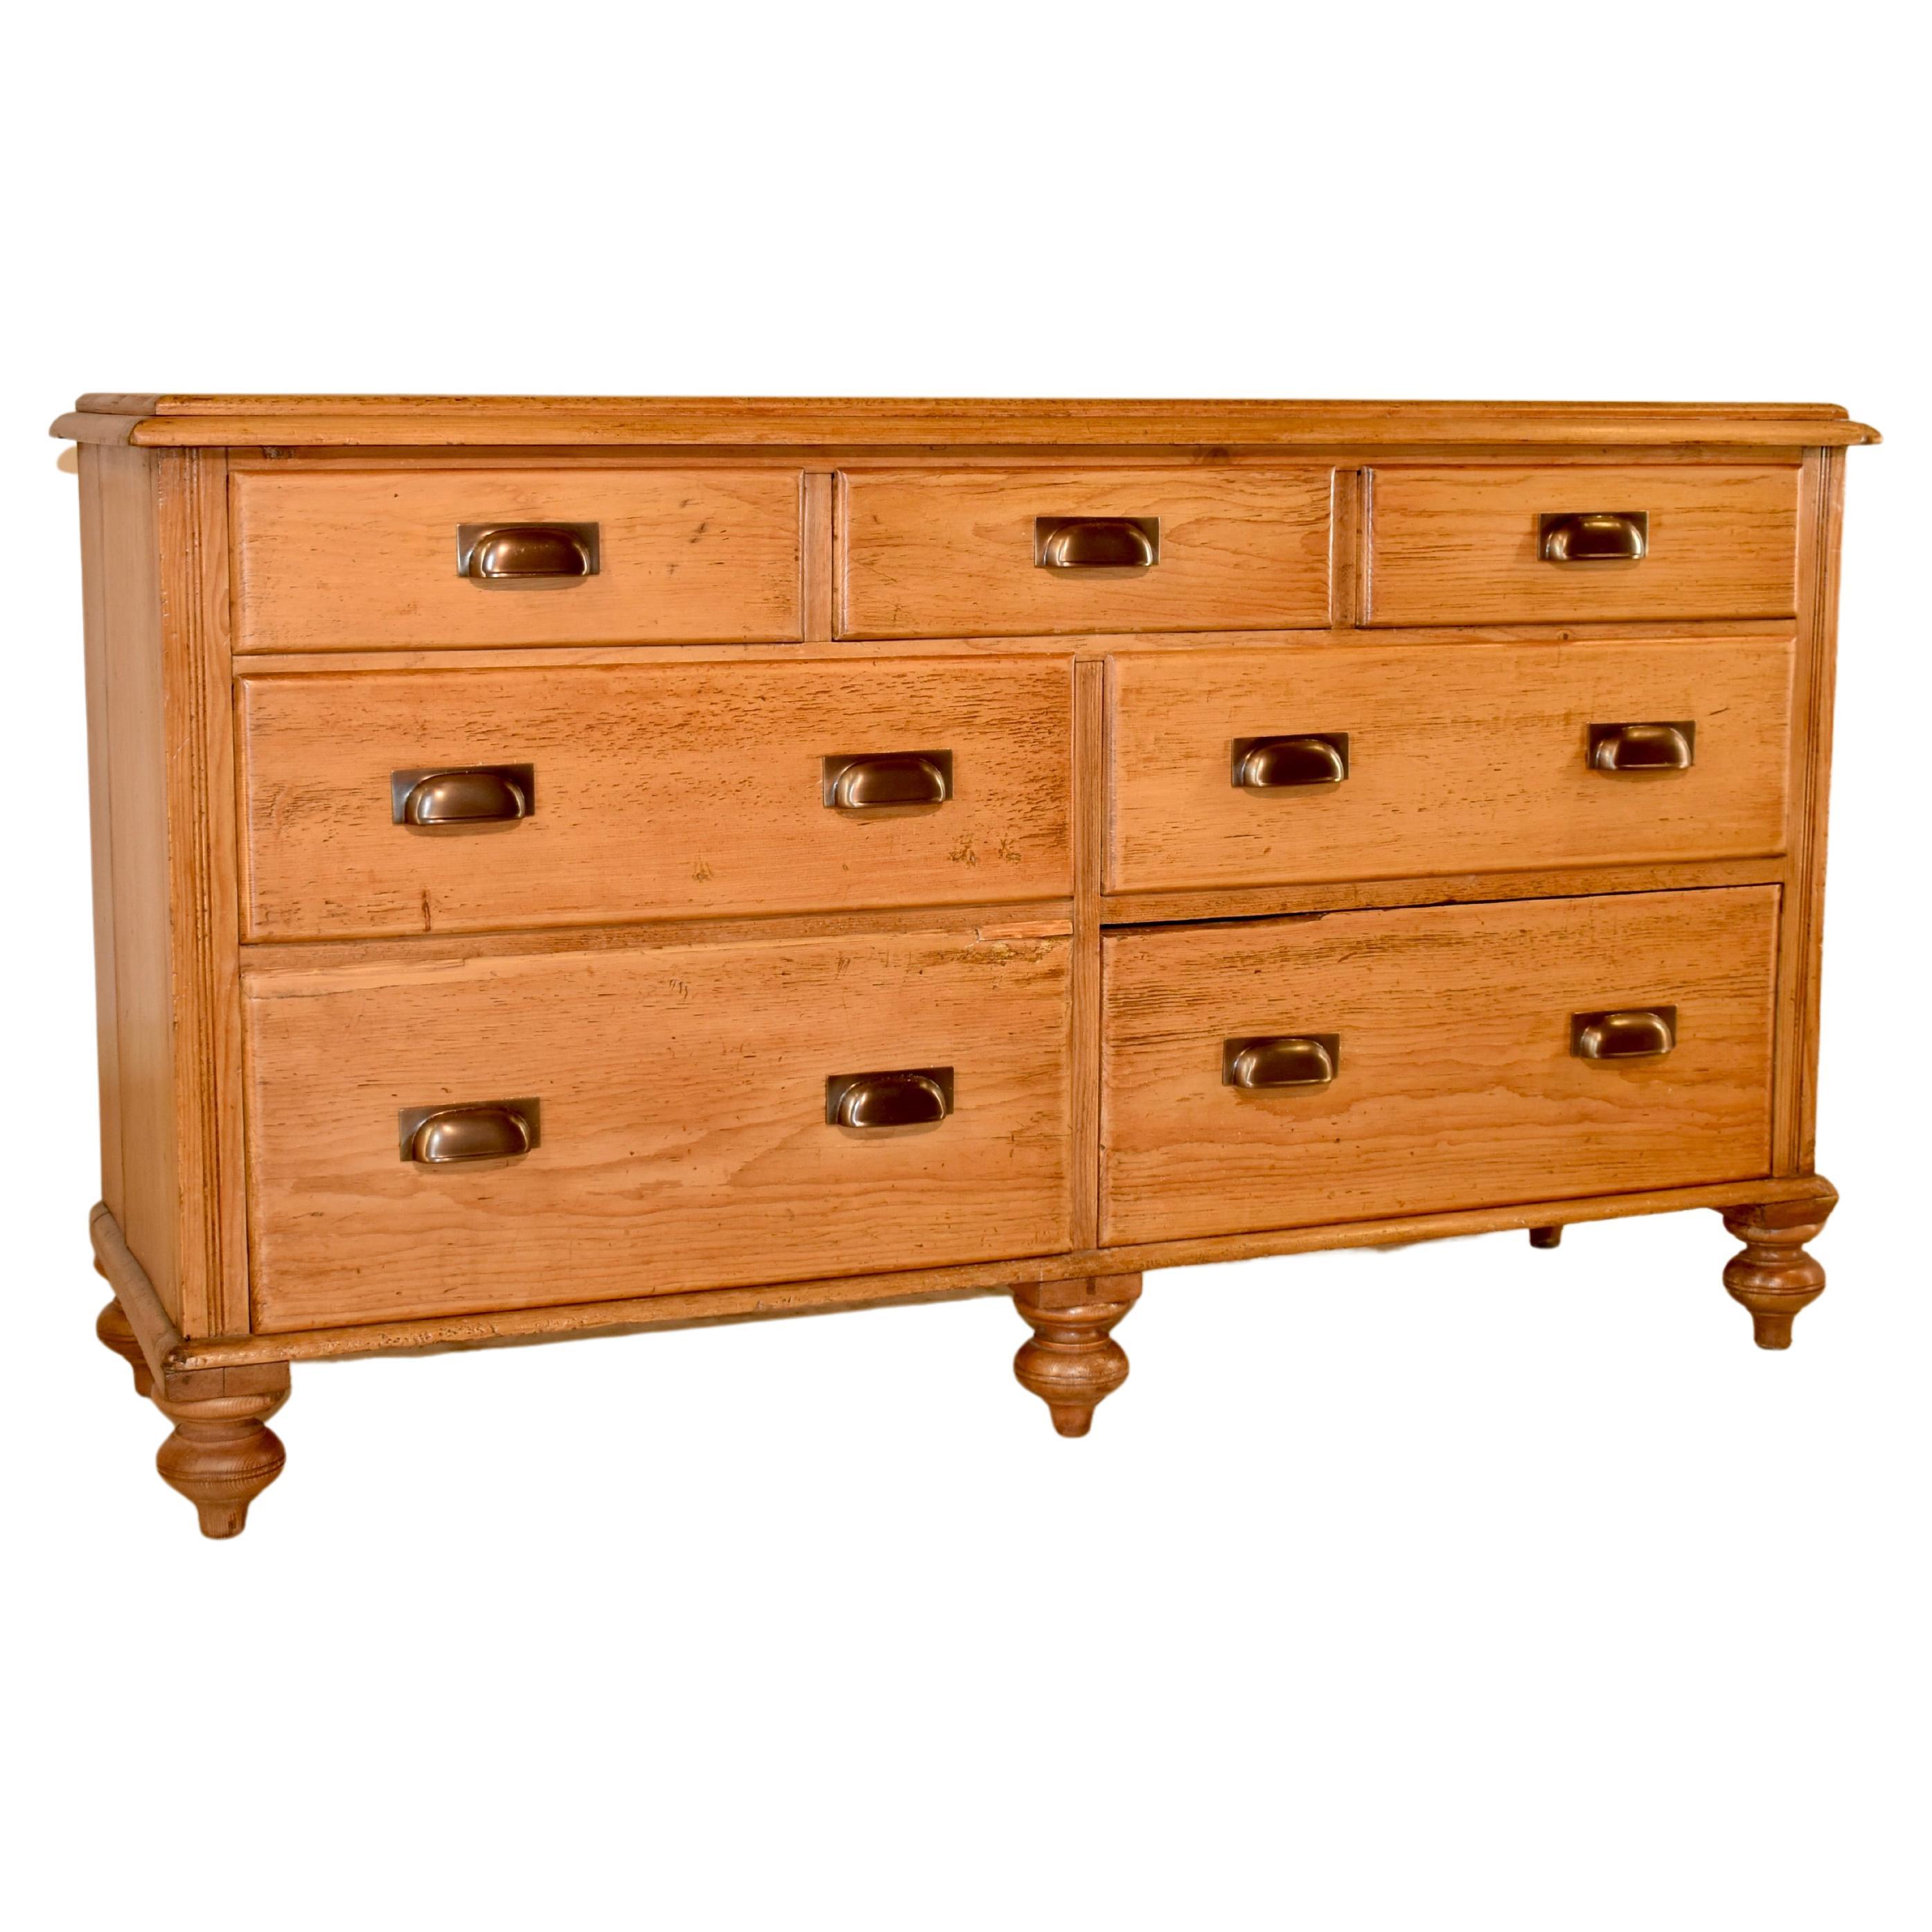 19th Century English Pine Wide Chest of Drawers